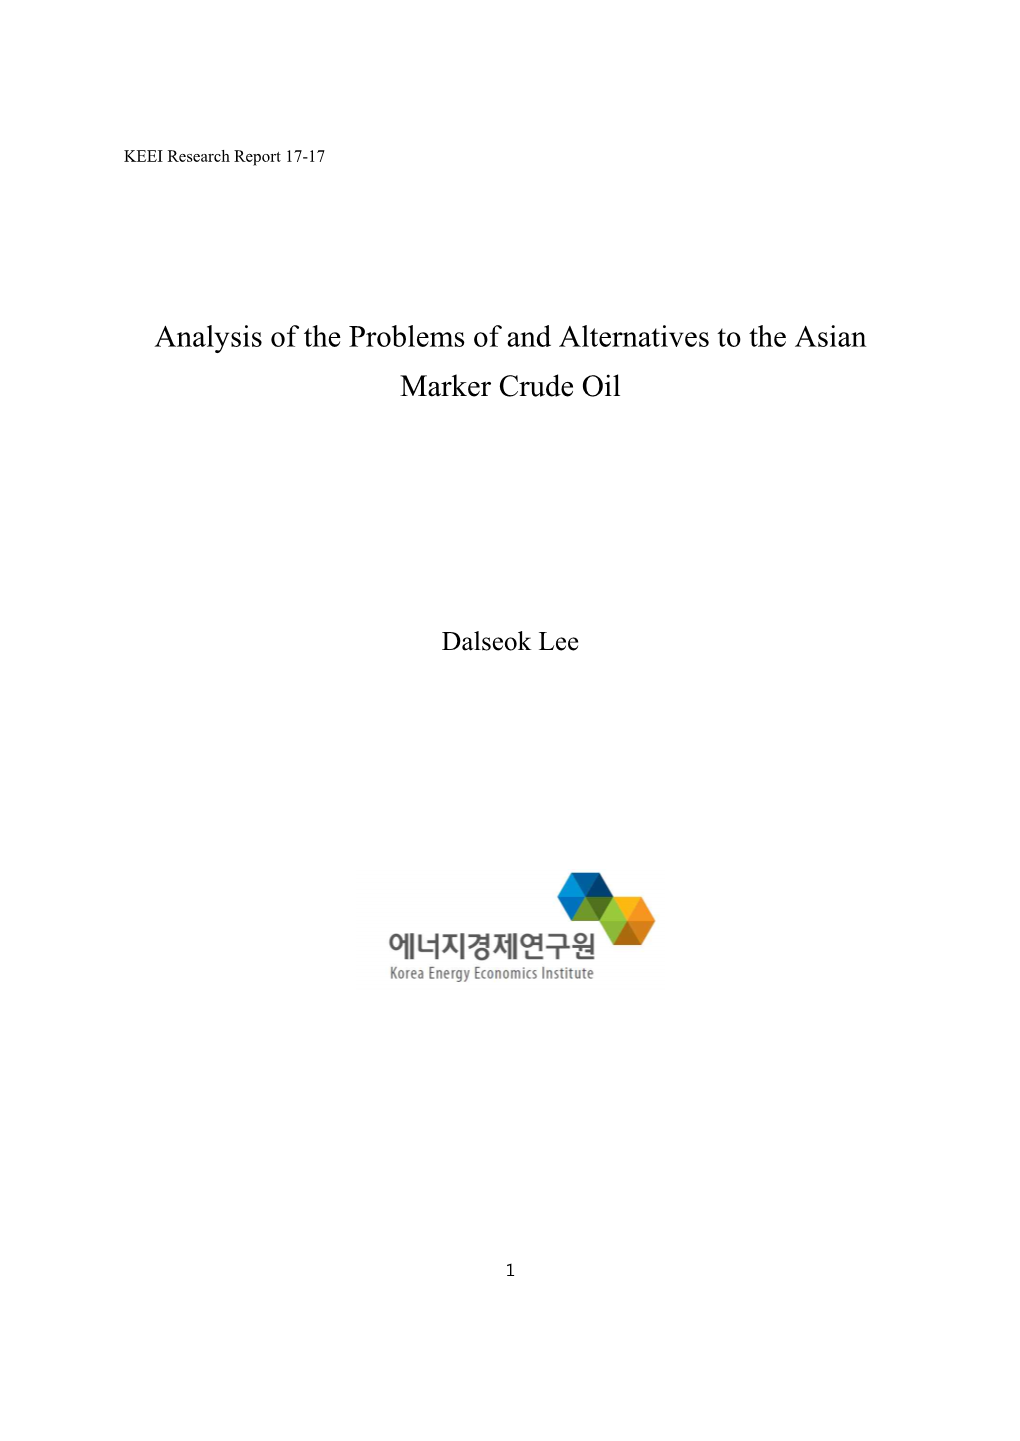 Analysis of the Problems of and Alternatives to the Asian Marker Crude Oil